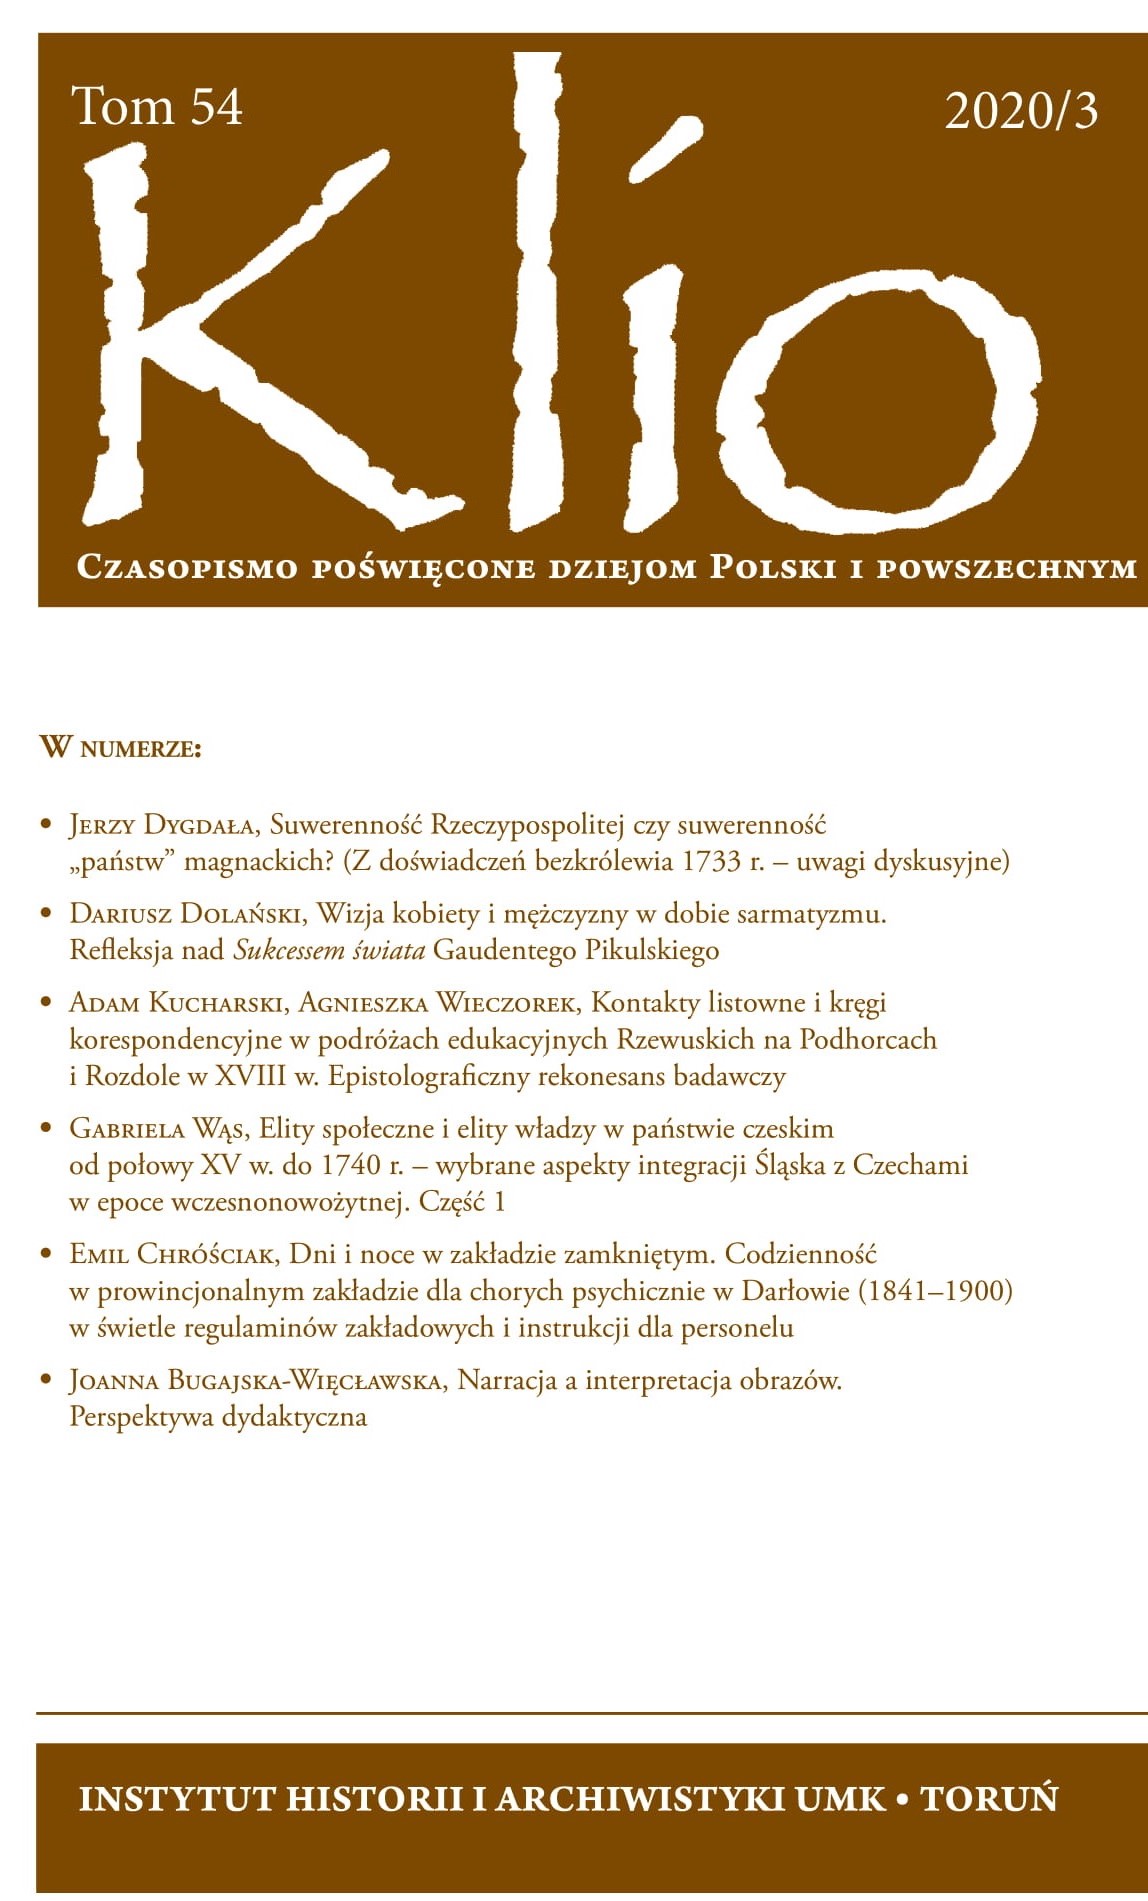 Epistolary contacts and correspondence circles in educational
trips of the Rzewuski family in Podhorce
and Rozdole in the 18th century Cover Image